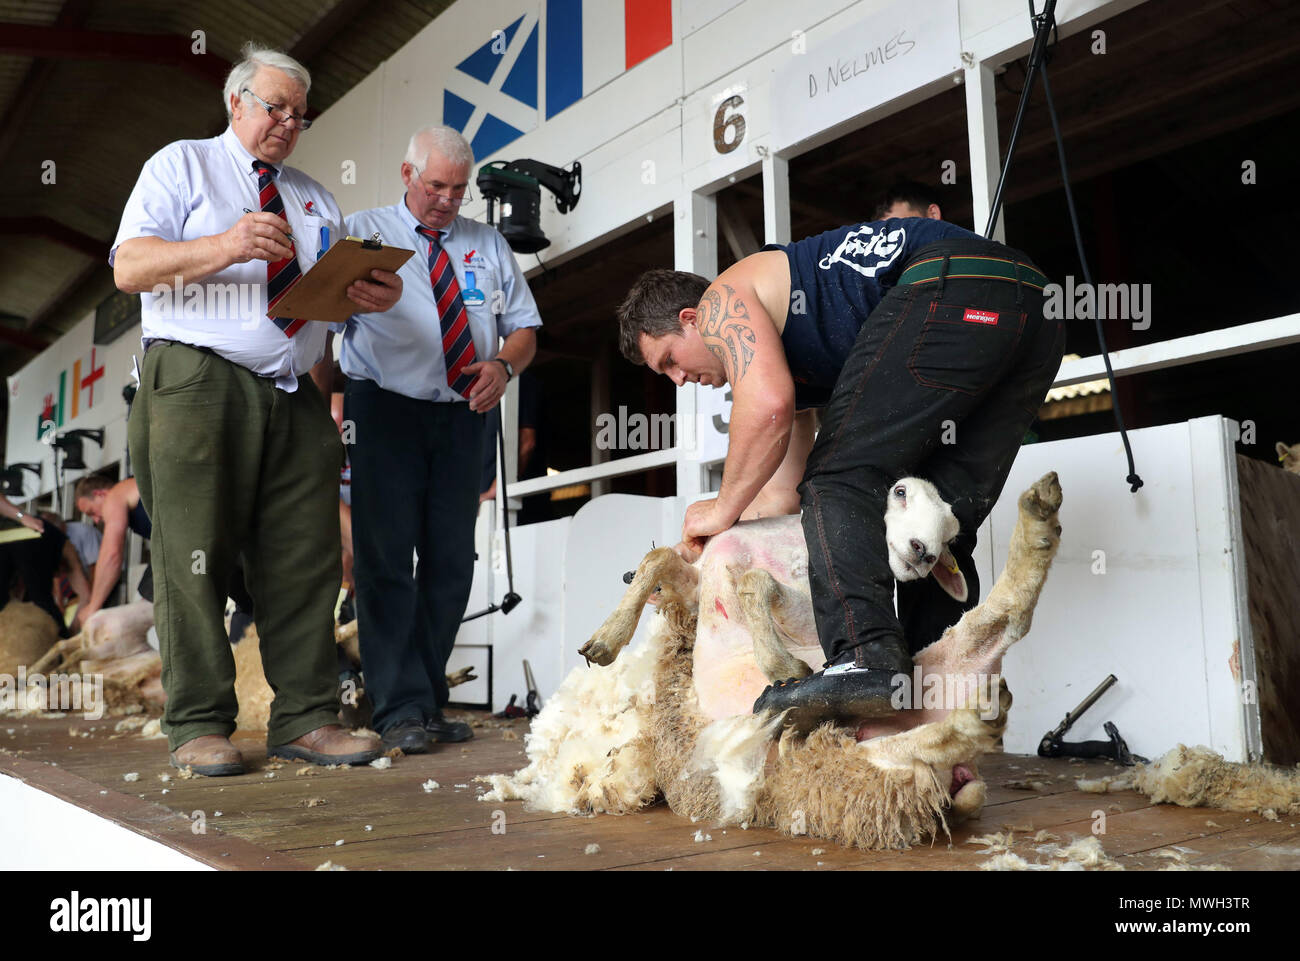 Dean Nelmes takes part in the first heat of the English National sheep shearing Championships during the Royal Bath and West Show at the Bath and West Showground near Shepton Mallet in Somerset. Stock Photo